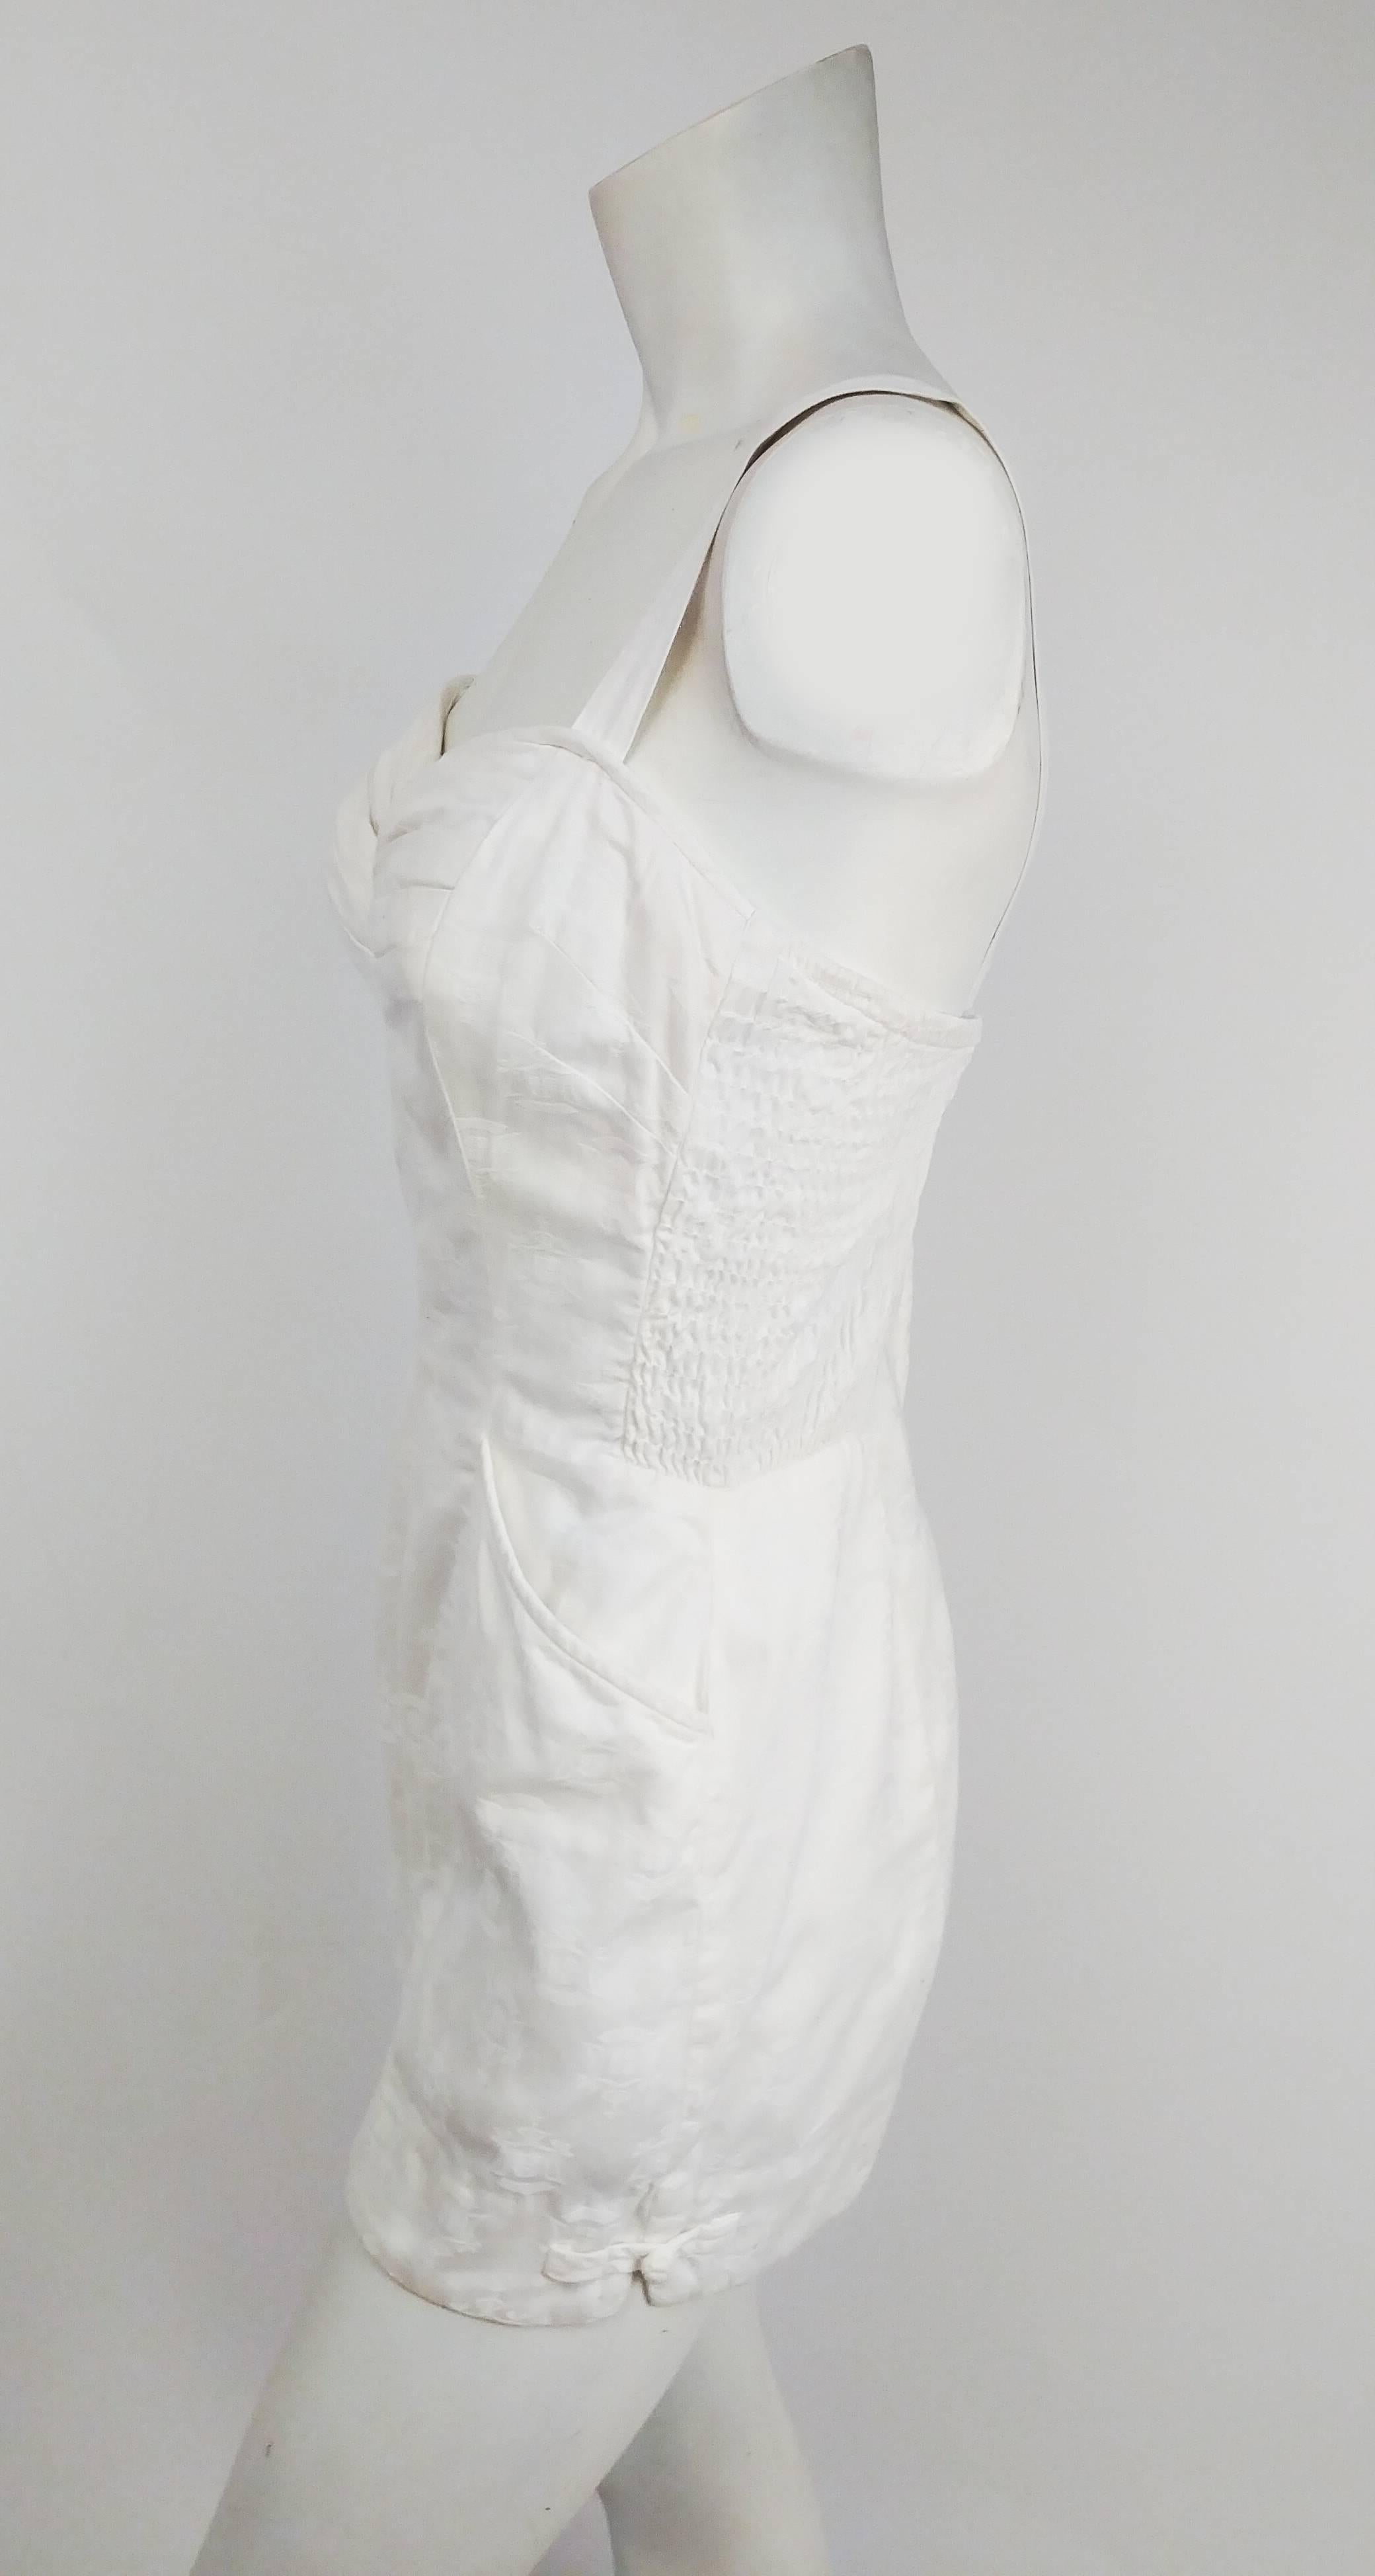 1950s Kamehameha White Cotton Damask Romper. Two front pockets. Frog clasp detail at side leg seams. Zips up back. Side panel shirring. Built-in cups in lining for support. Adjustable back straps. 